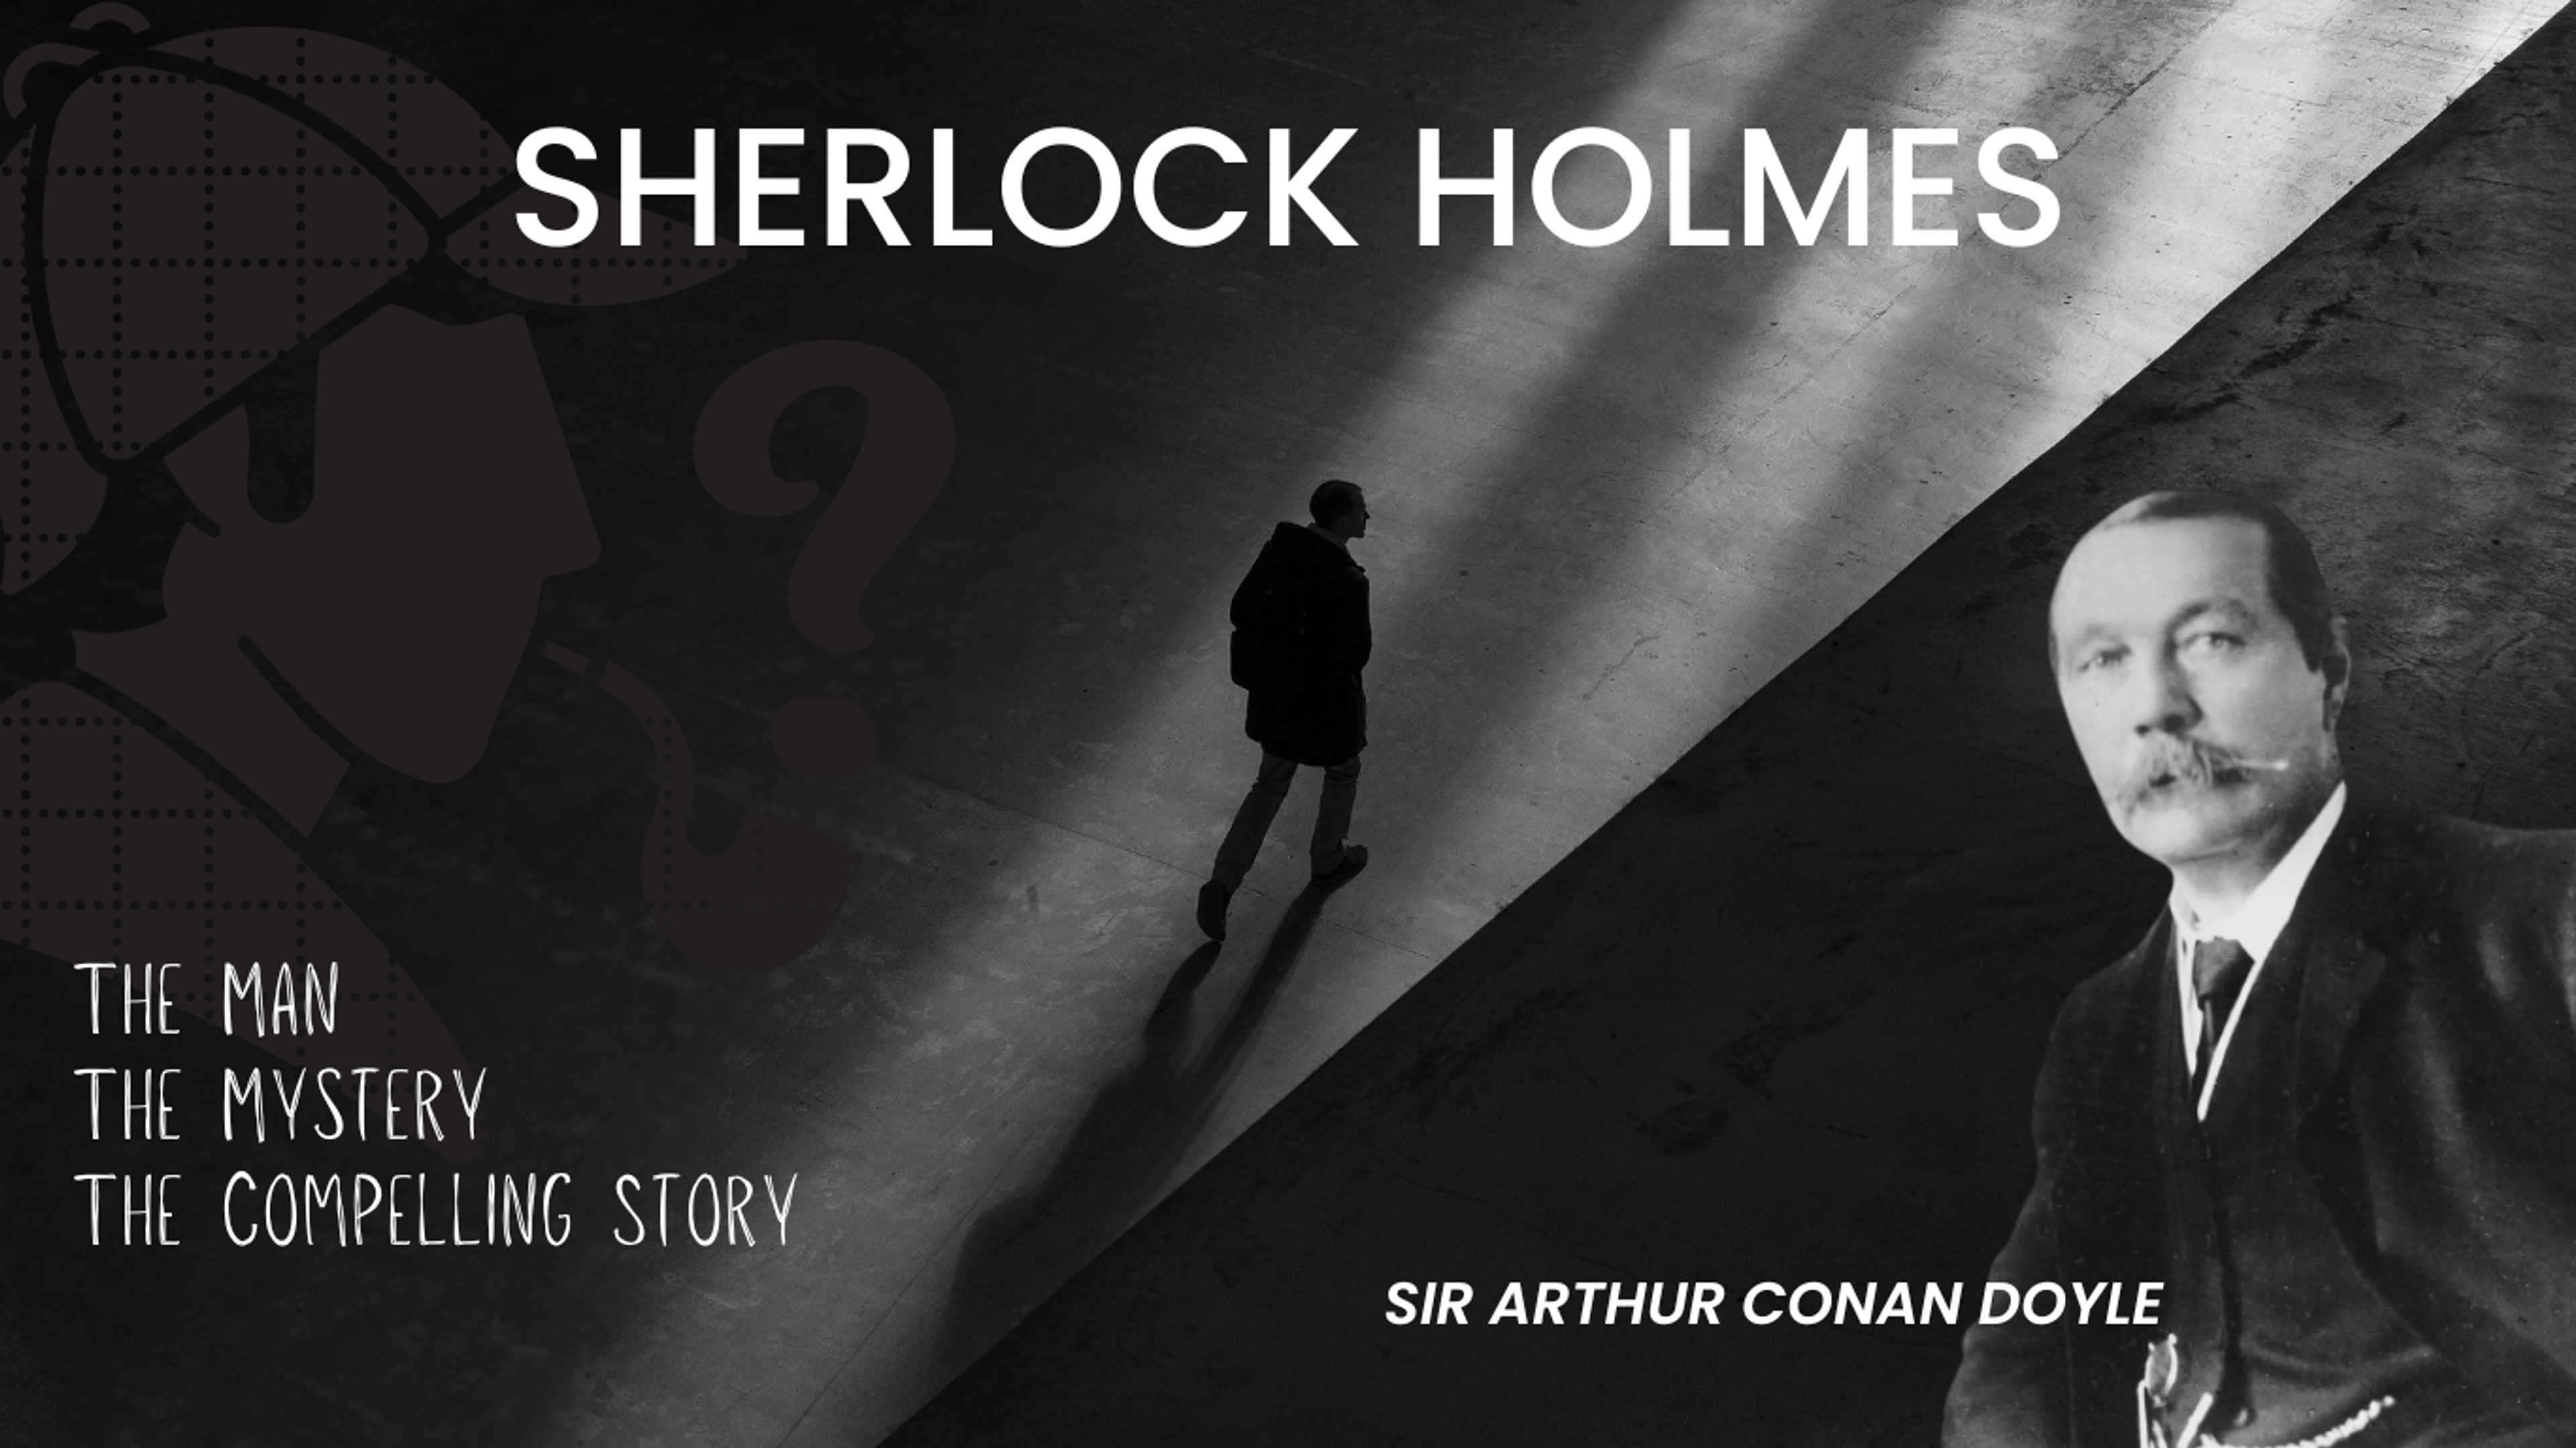 The Compelling Mystery of the Man Behind Sherlock Holmes